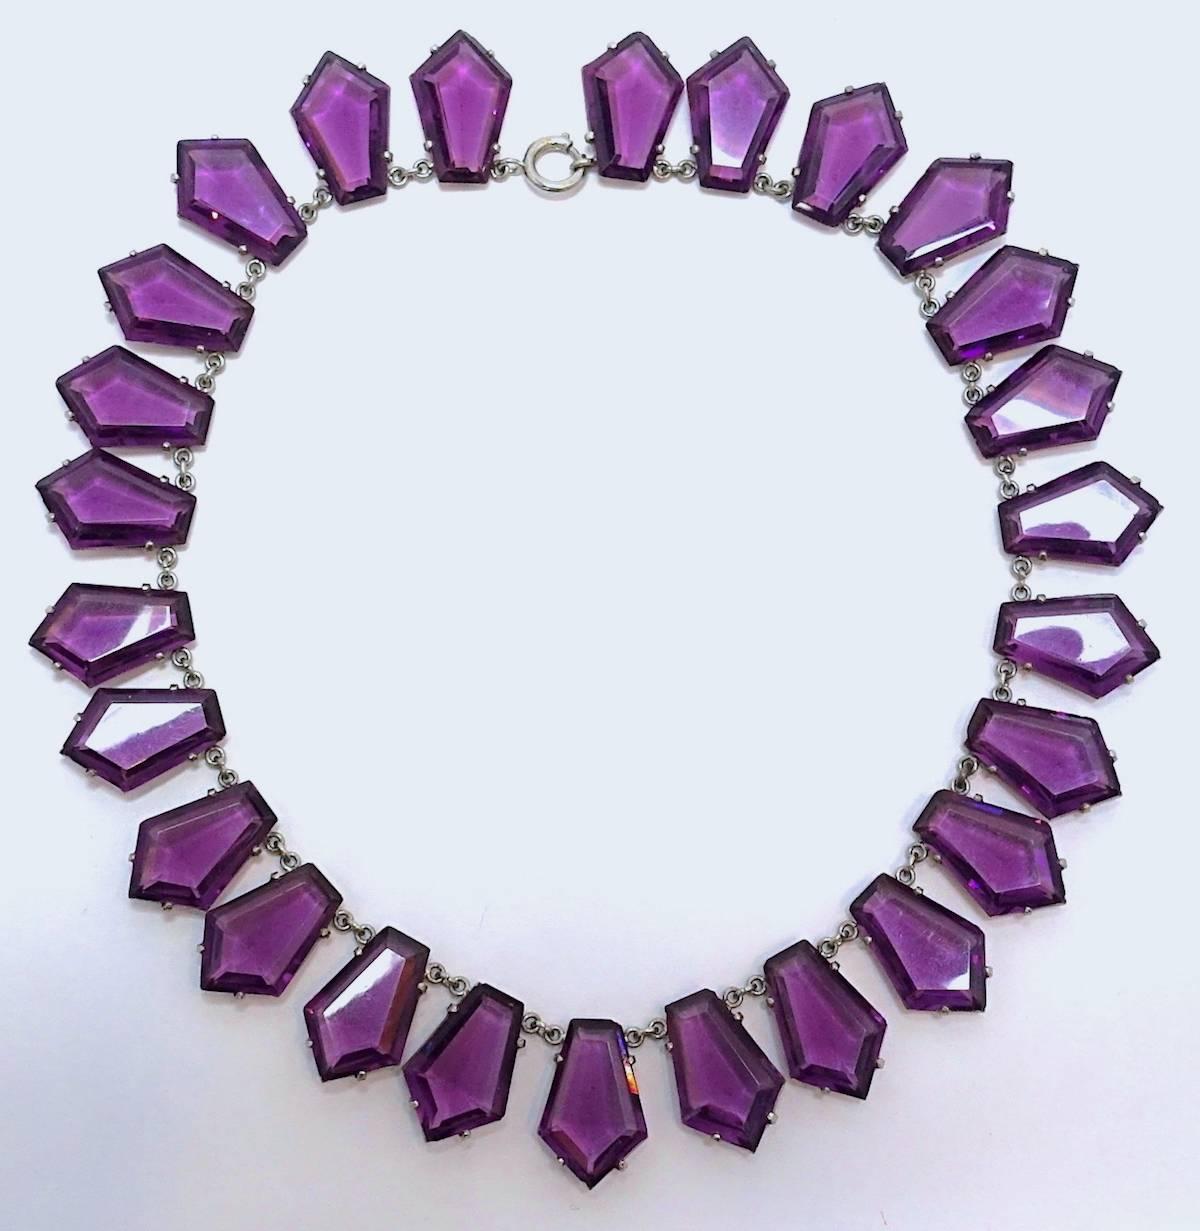 I love old Czech necklaces, especially when they come out of a collection like new.  This is extraordinary.  It has 26 chrystal faux amethyst drops all prong set with the old turn catch.  Each drop is 1”x 1/2